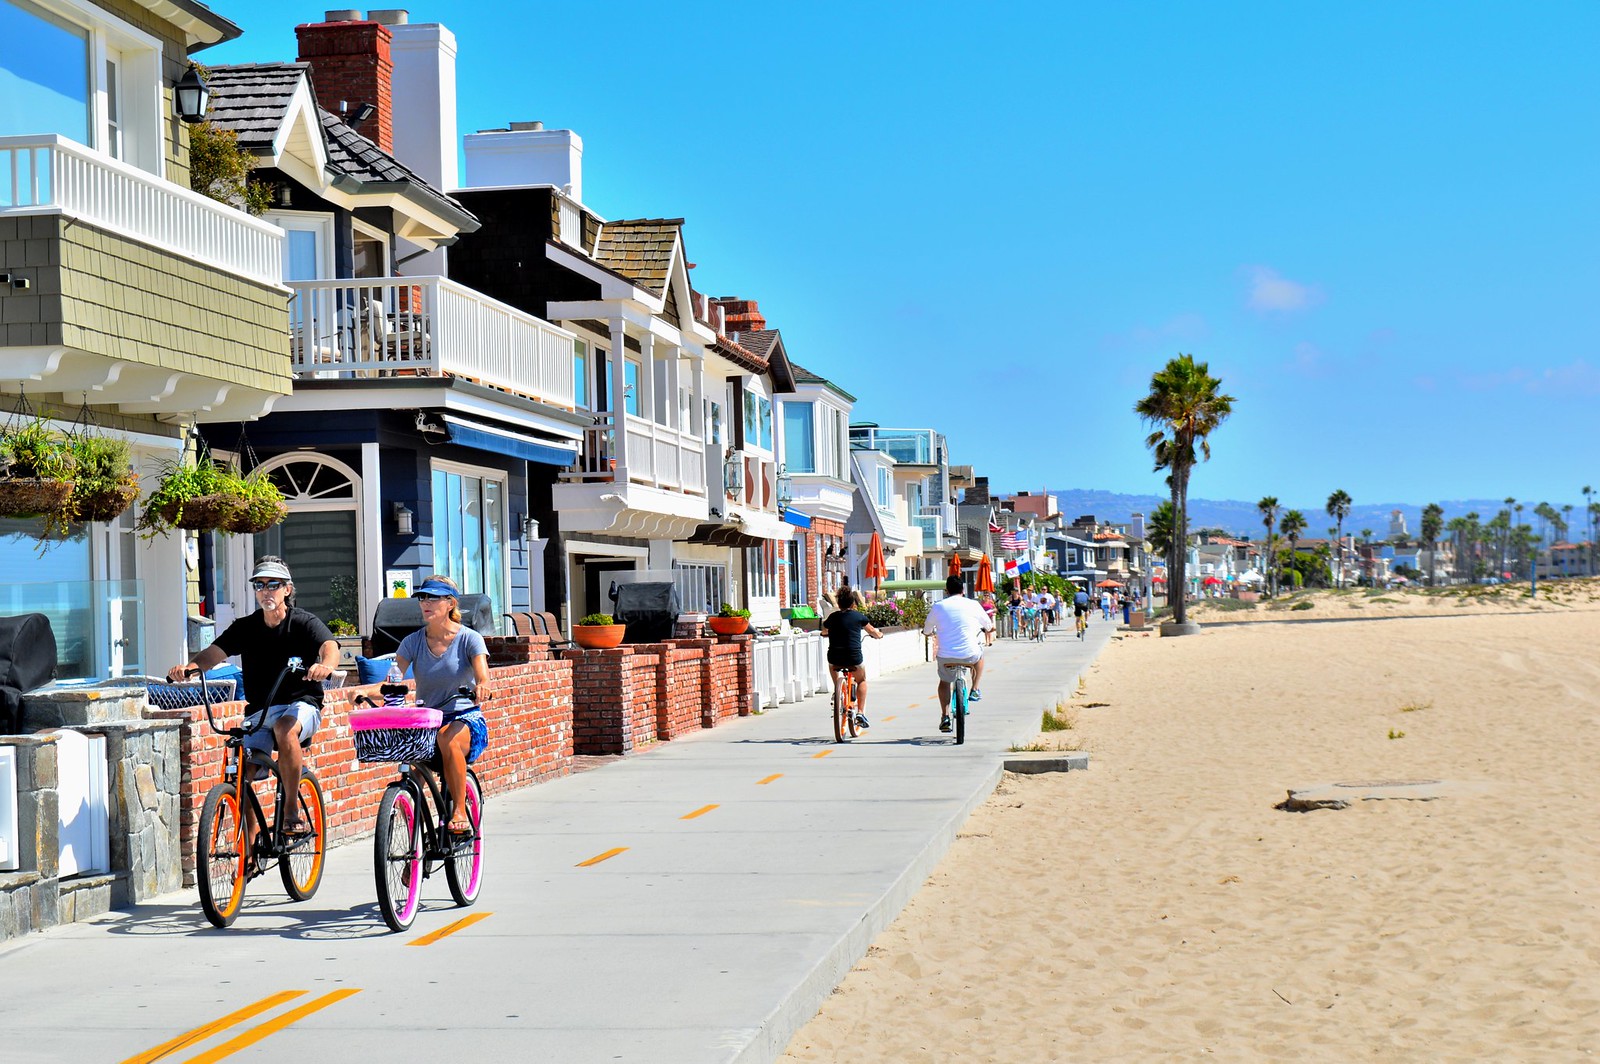 Huntington Beach is the Most Hipsterlicious Surfing Spot in California